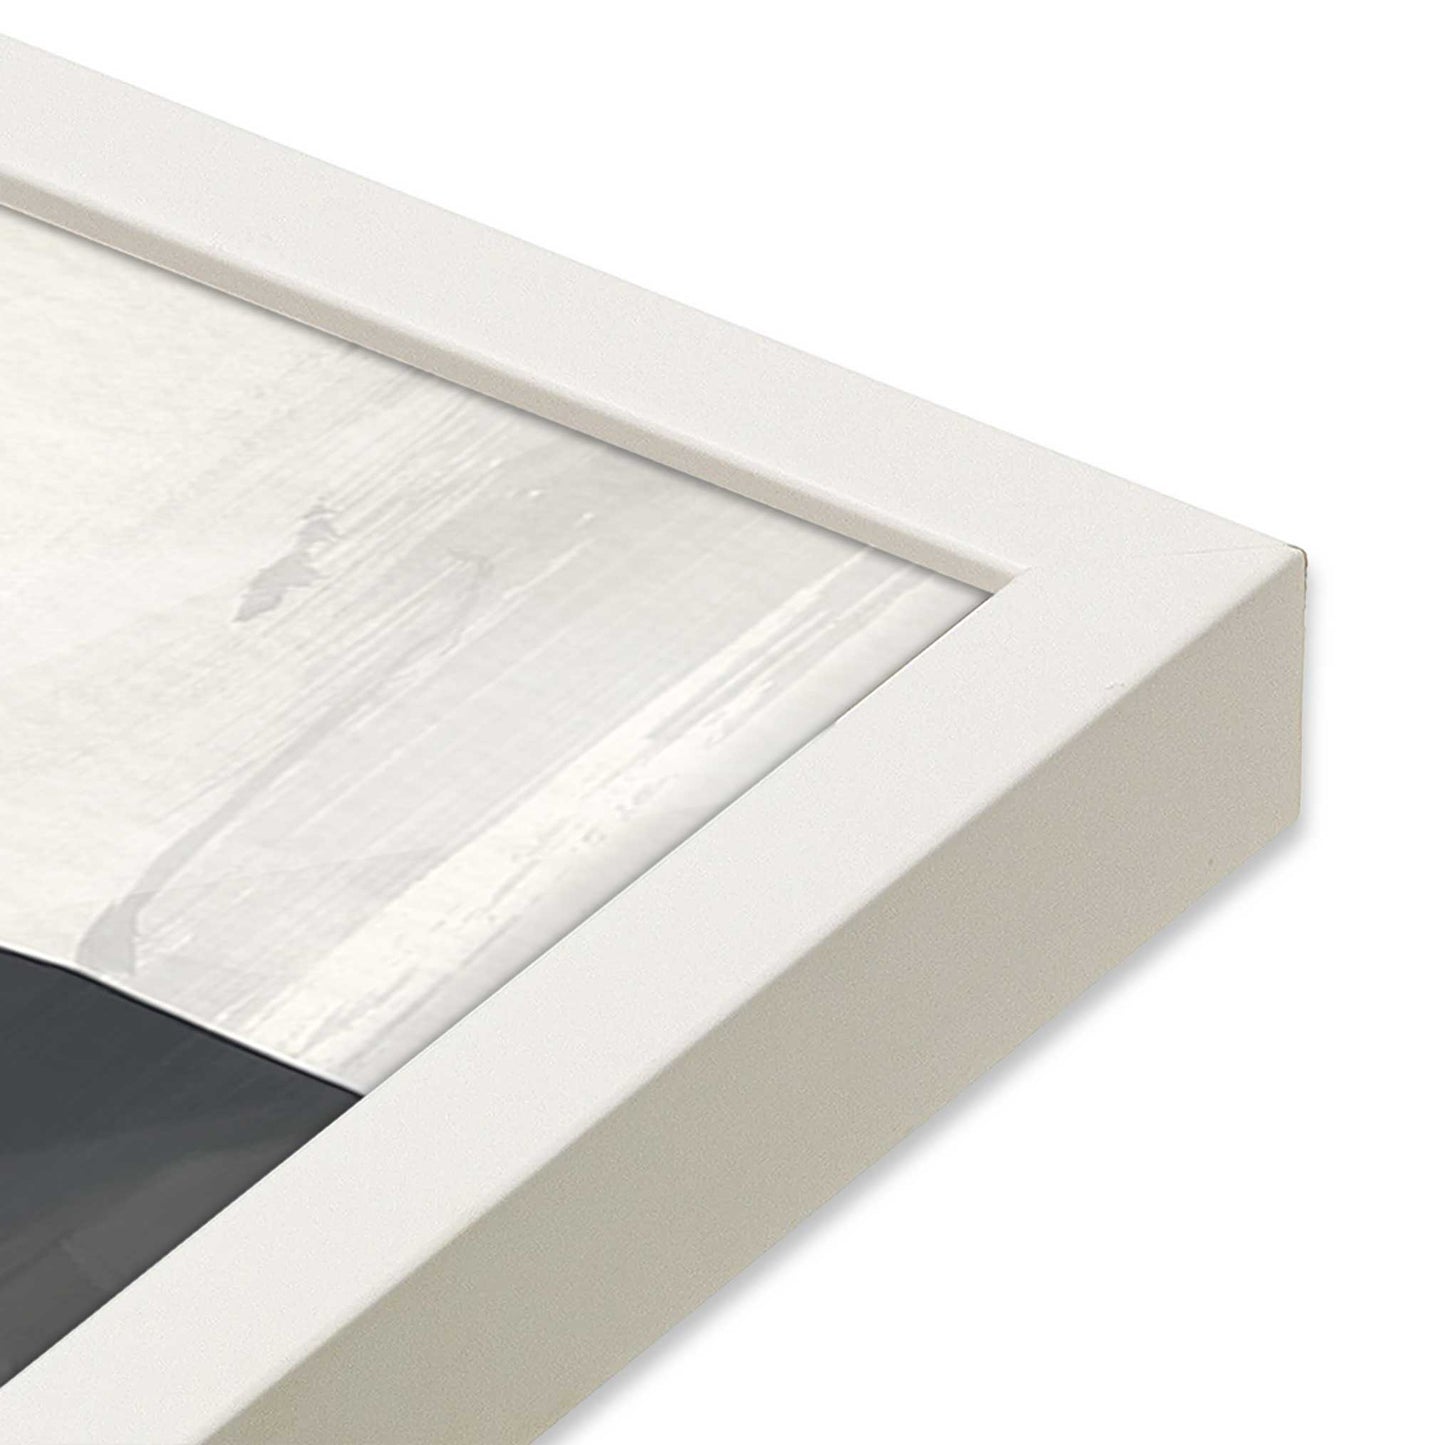 [Color:Opaque White], Picture of art in a Opaque White frame of the corner #2